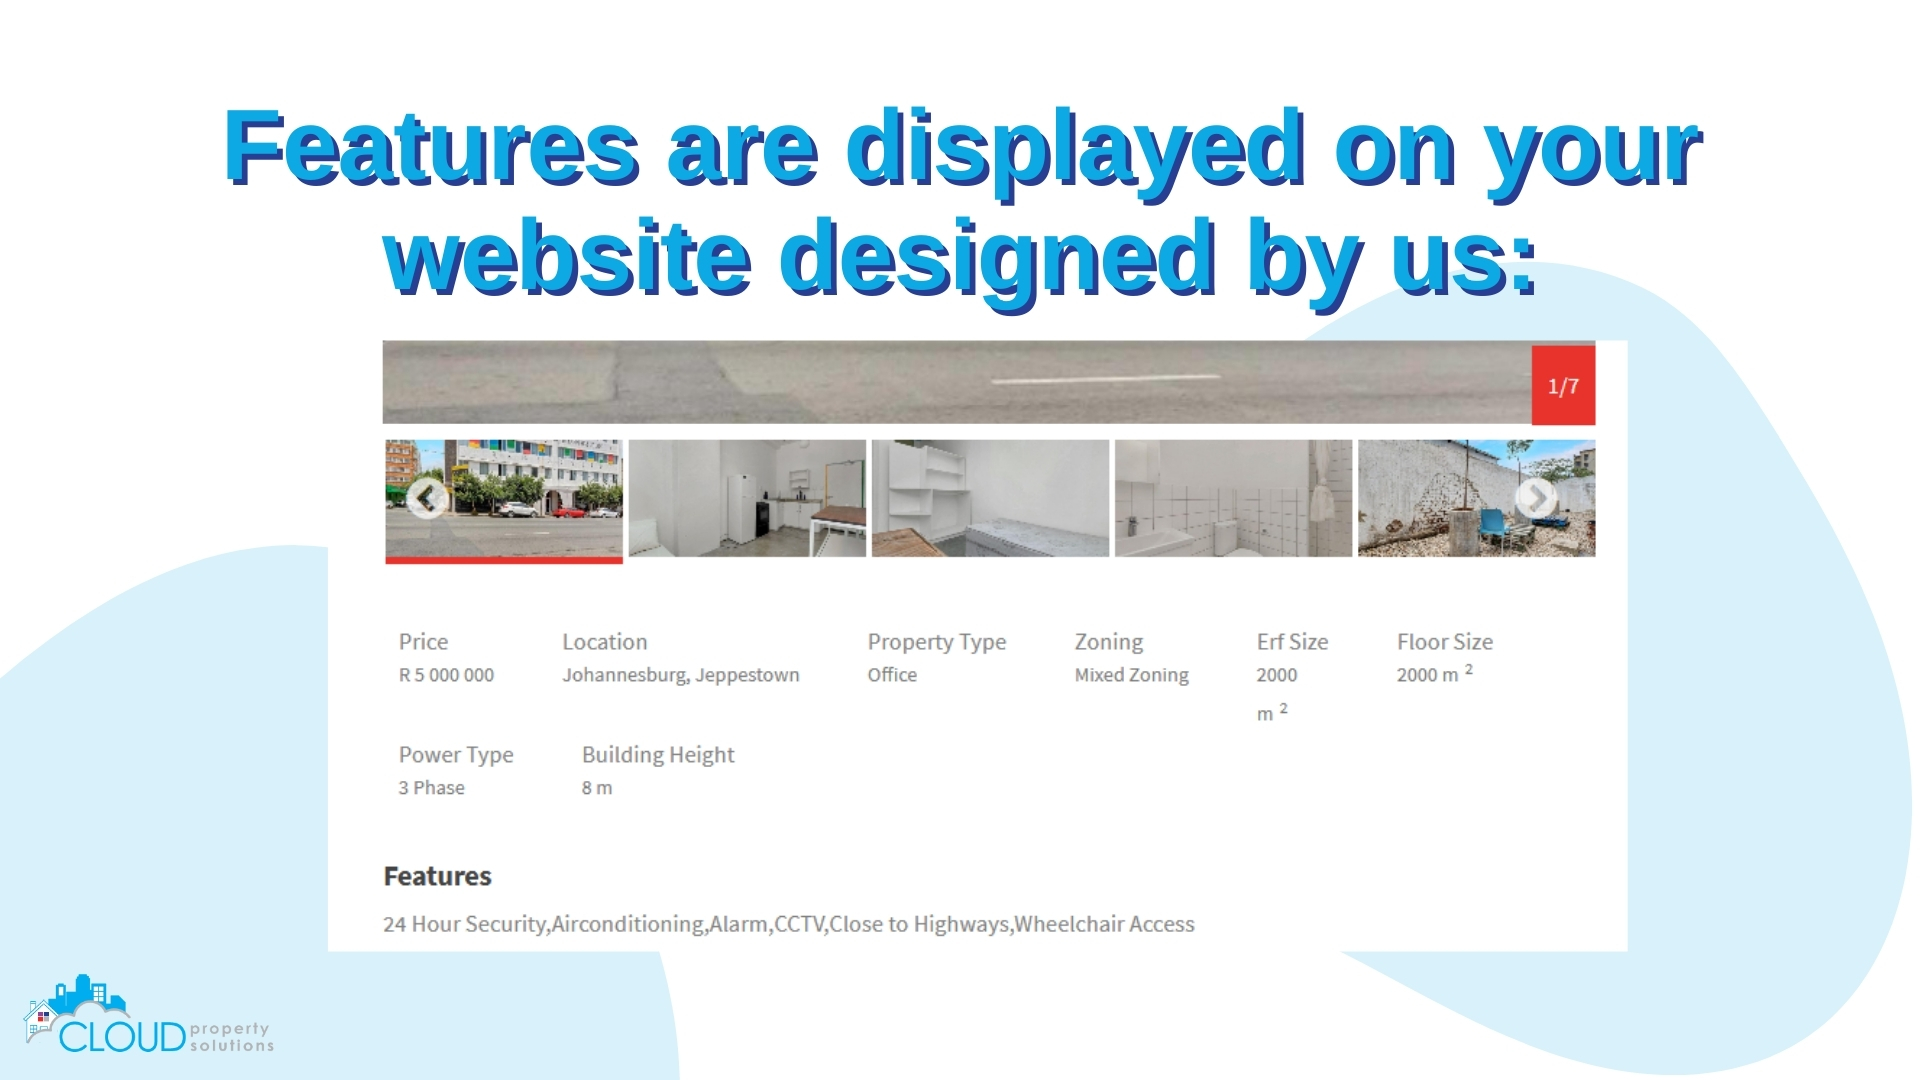 The information captured on the Features screen is published on your website and used in your property brochures